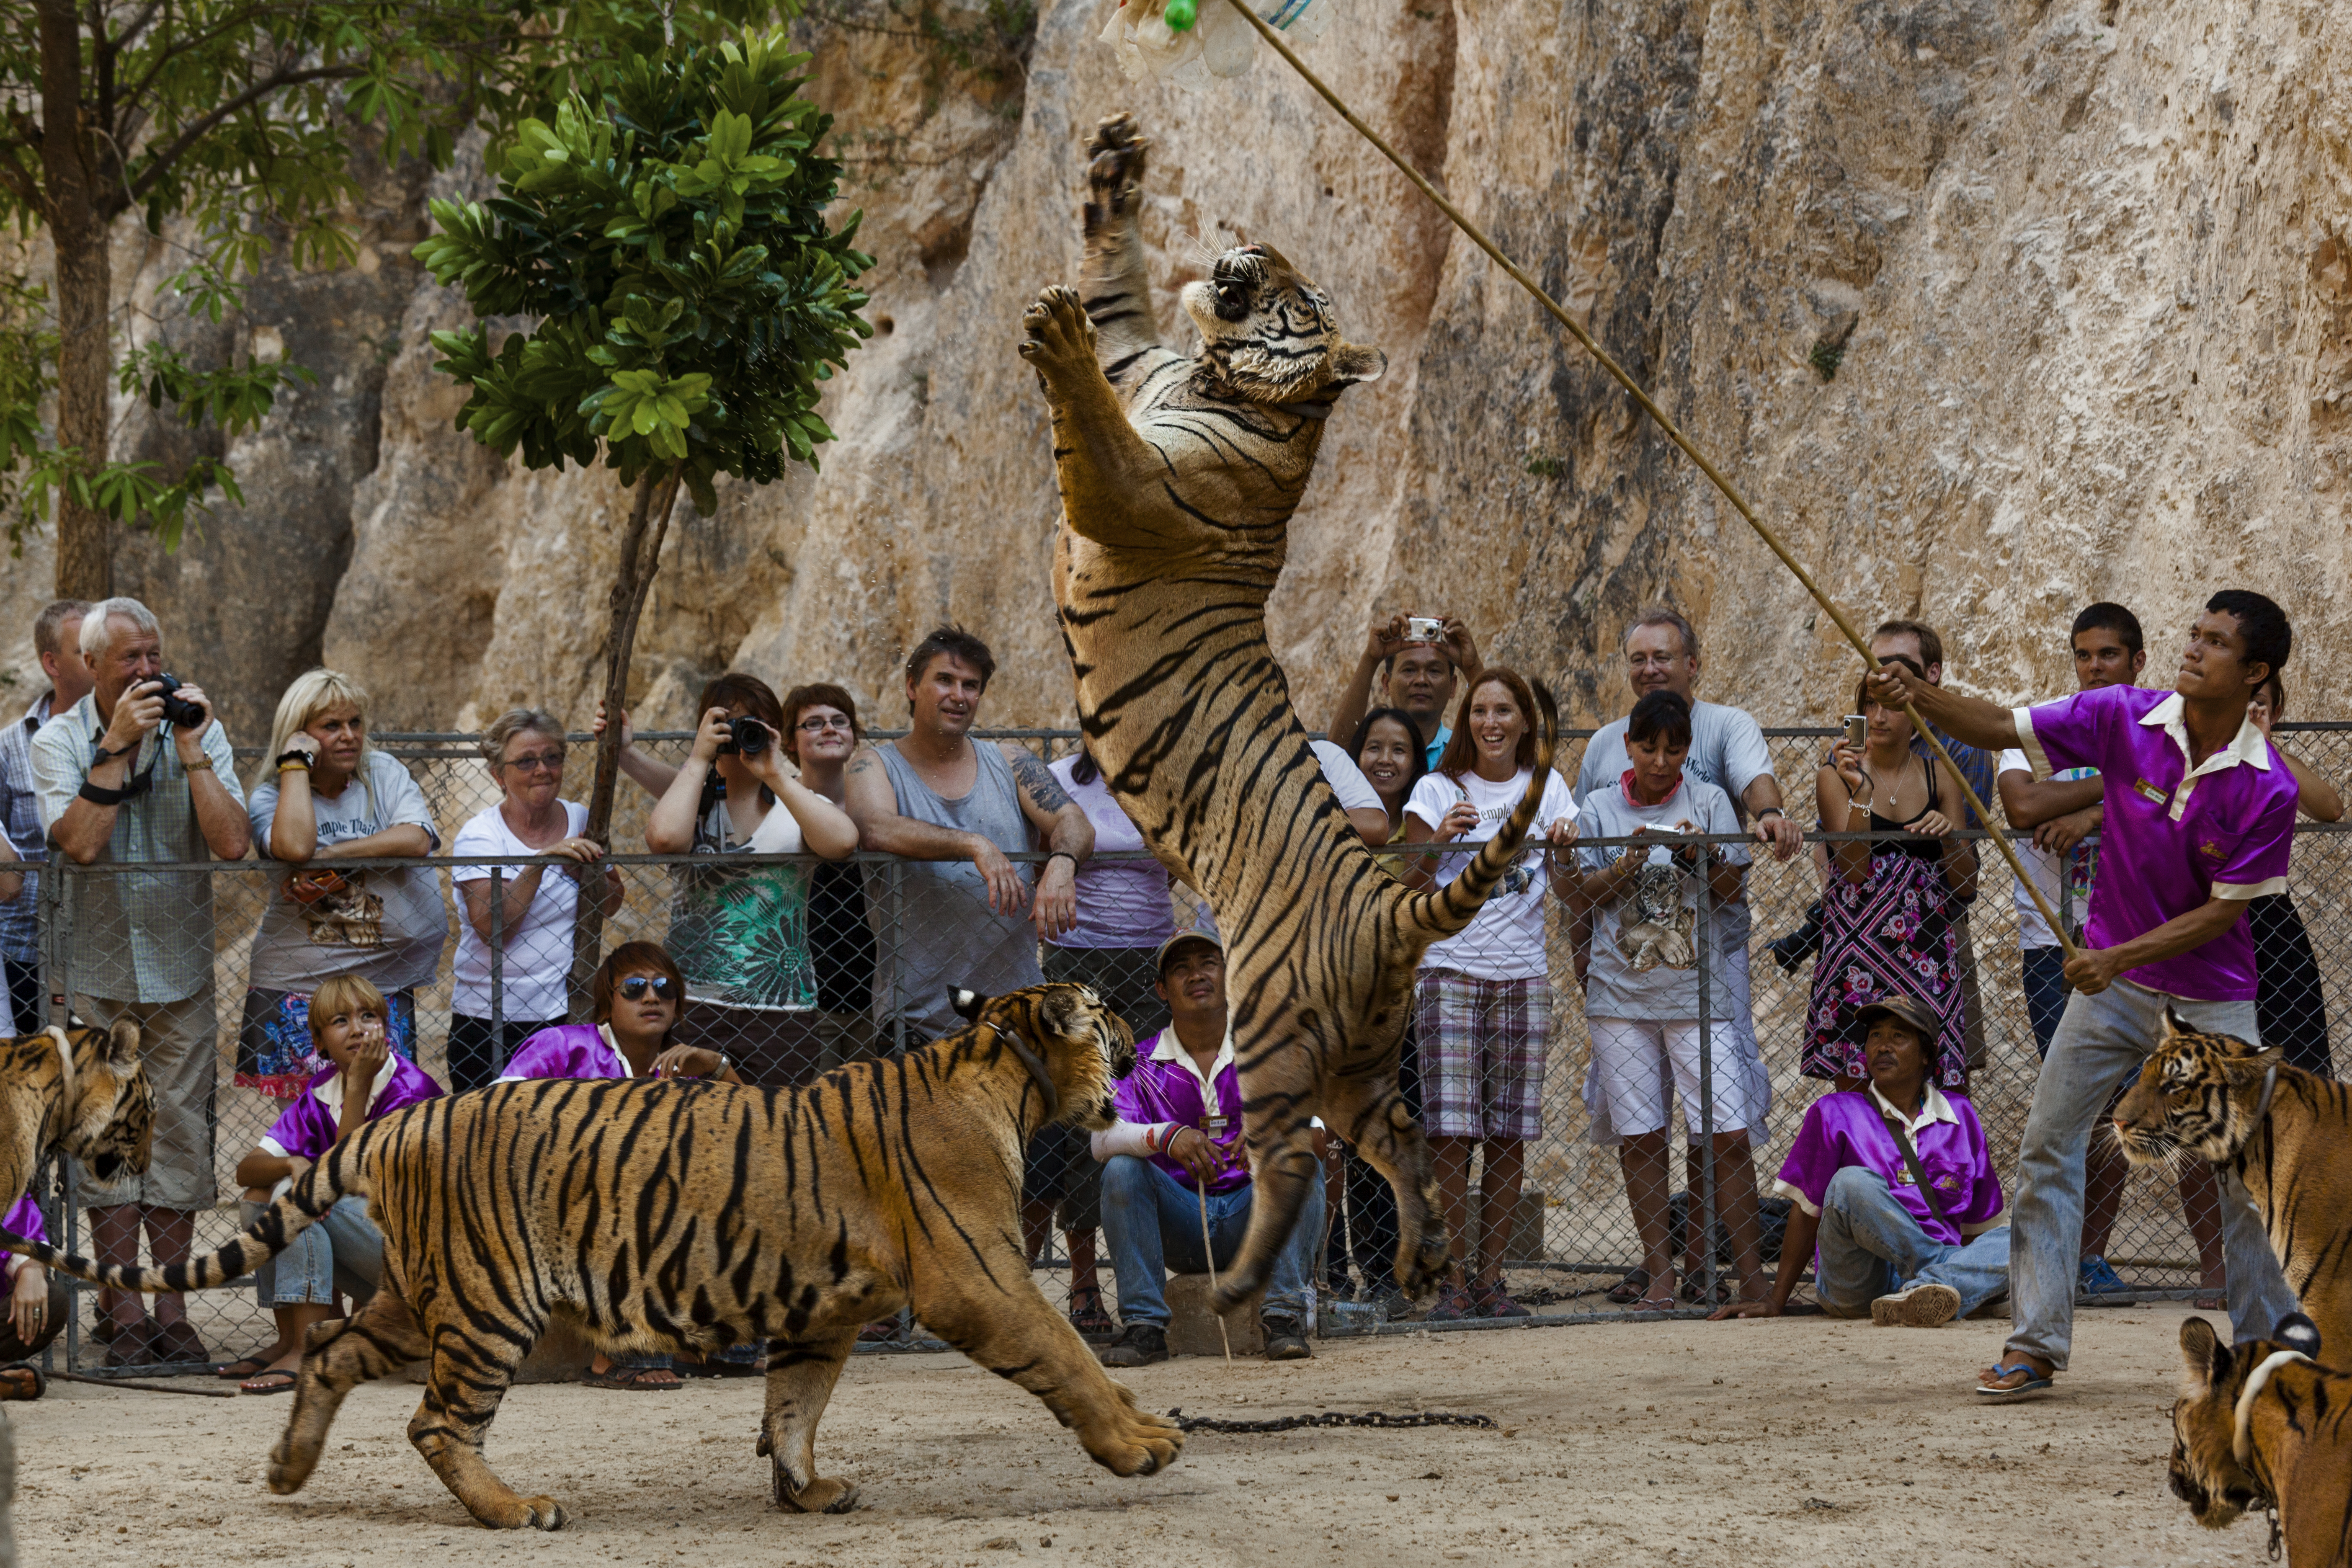 Tiger jumping before a crowd